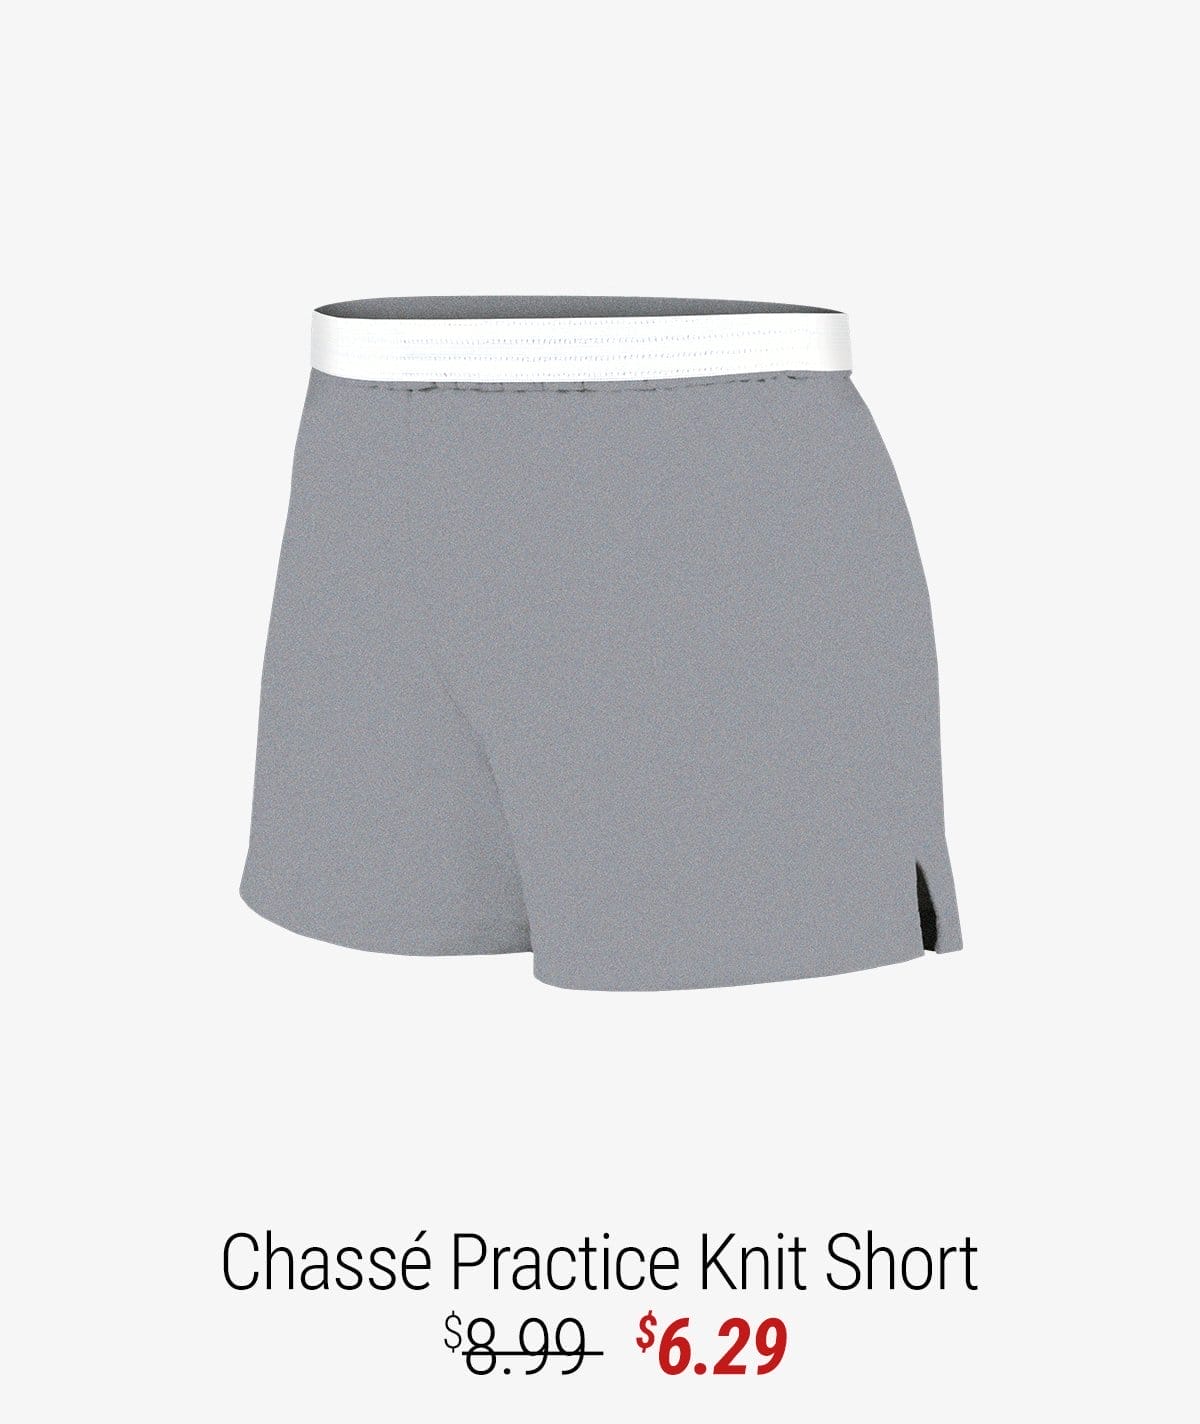 CHASSE PRACTICE KNIT SHORTS